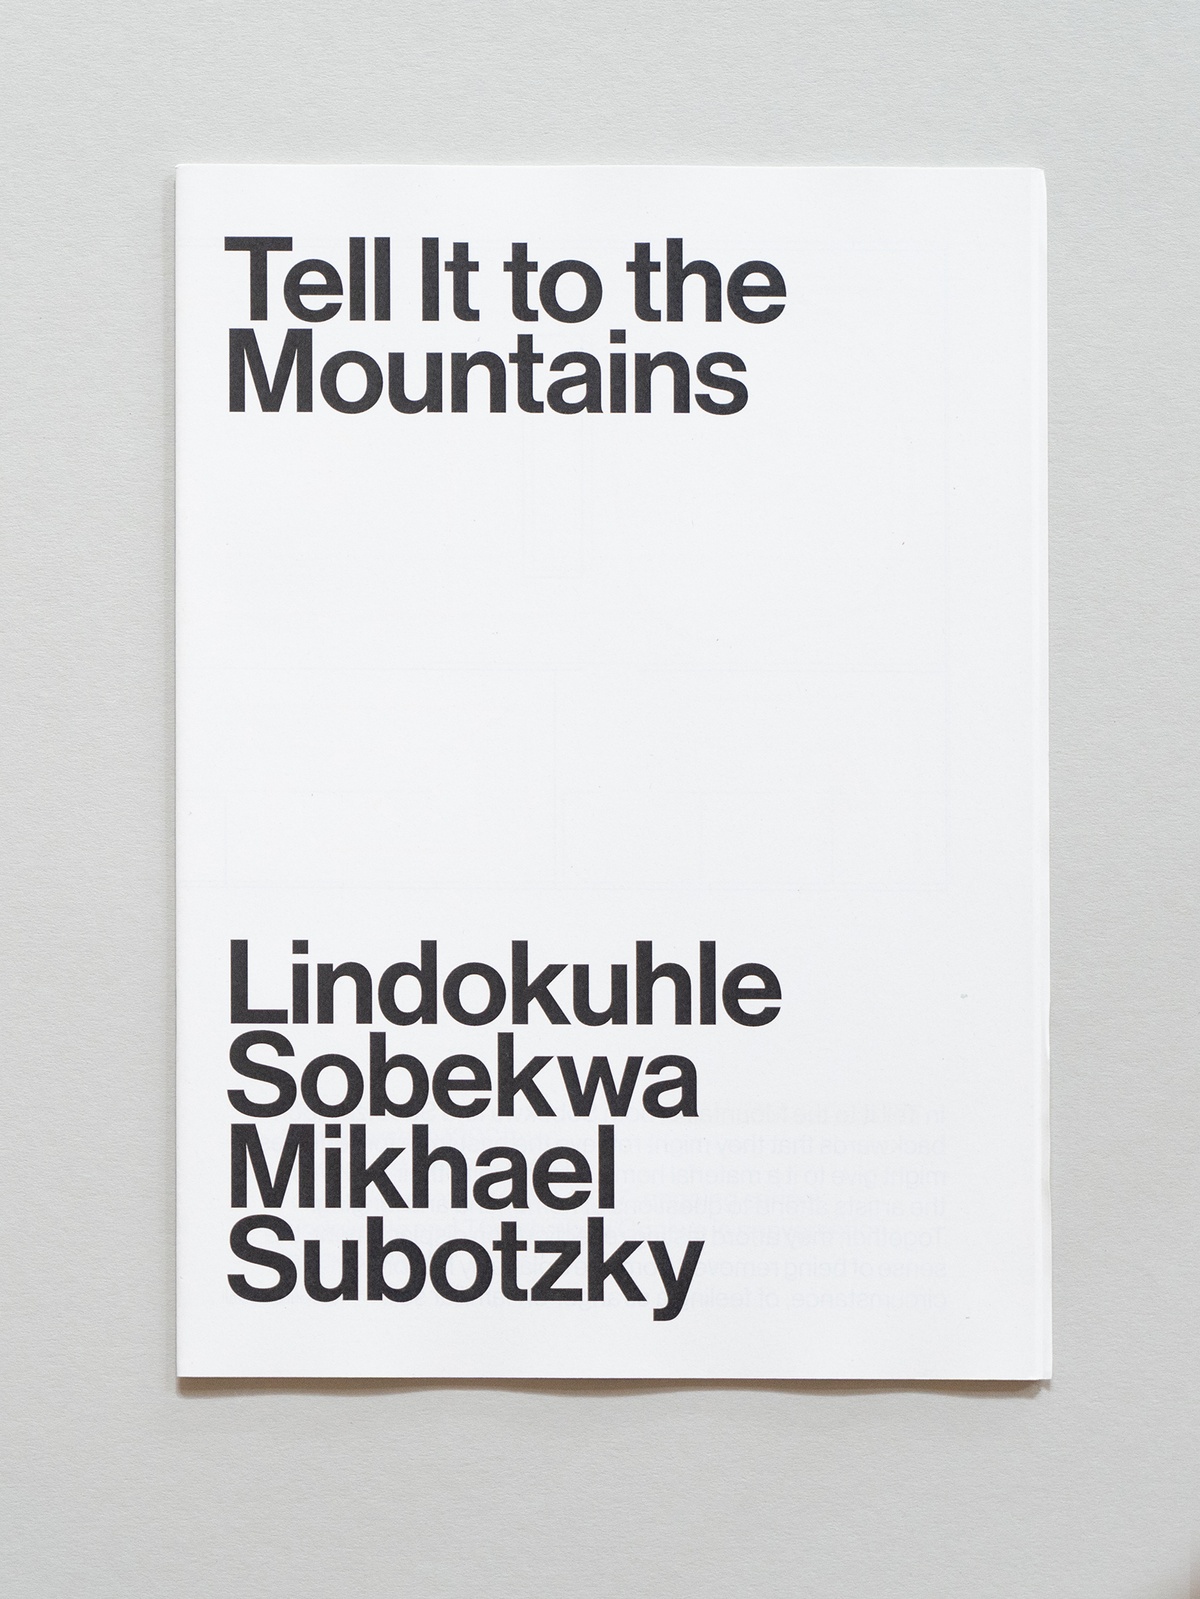 Photograph of the wayfinder publication for Tell it to the Mountains exhibition by Lindokuhle Sobekwa and Mikhael Subotzky in A4 Arts Foundation's Gallery.
